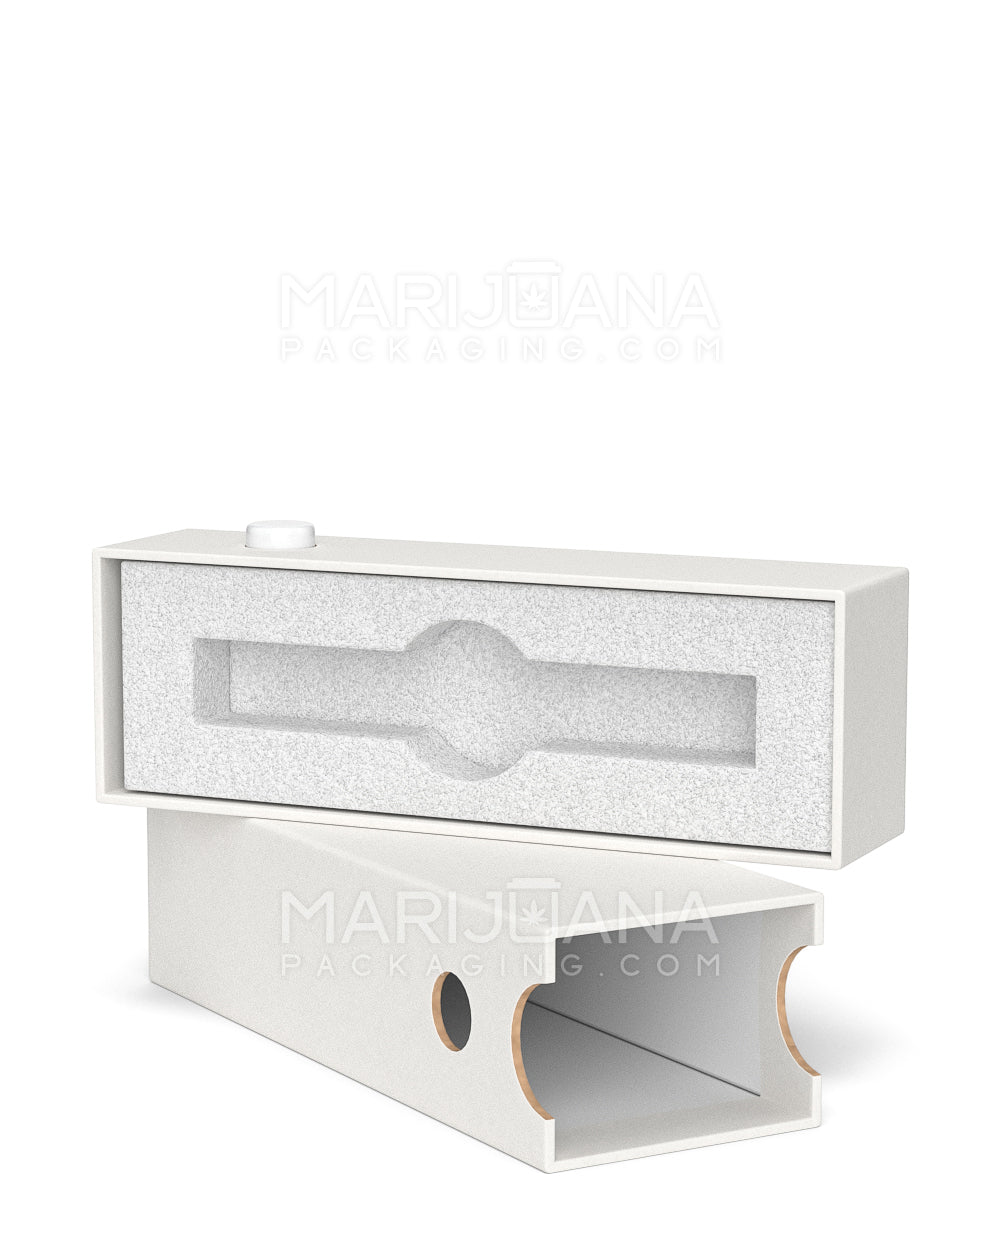 Child Resistant & Sustainable | 100% Recyclable Cardboard Vape Cartridge Box w/ Button & Foam Insert | 100mm - White  - 6